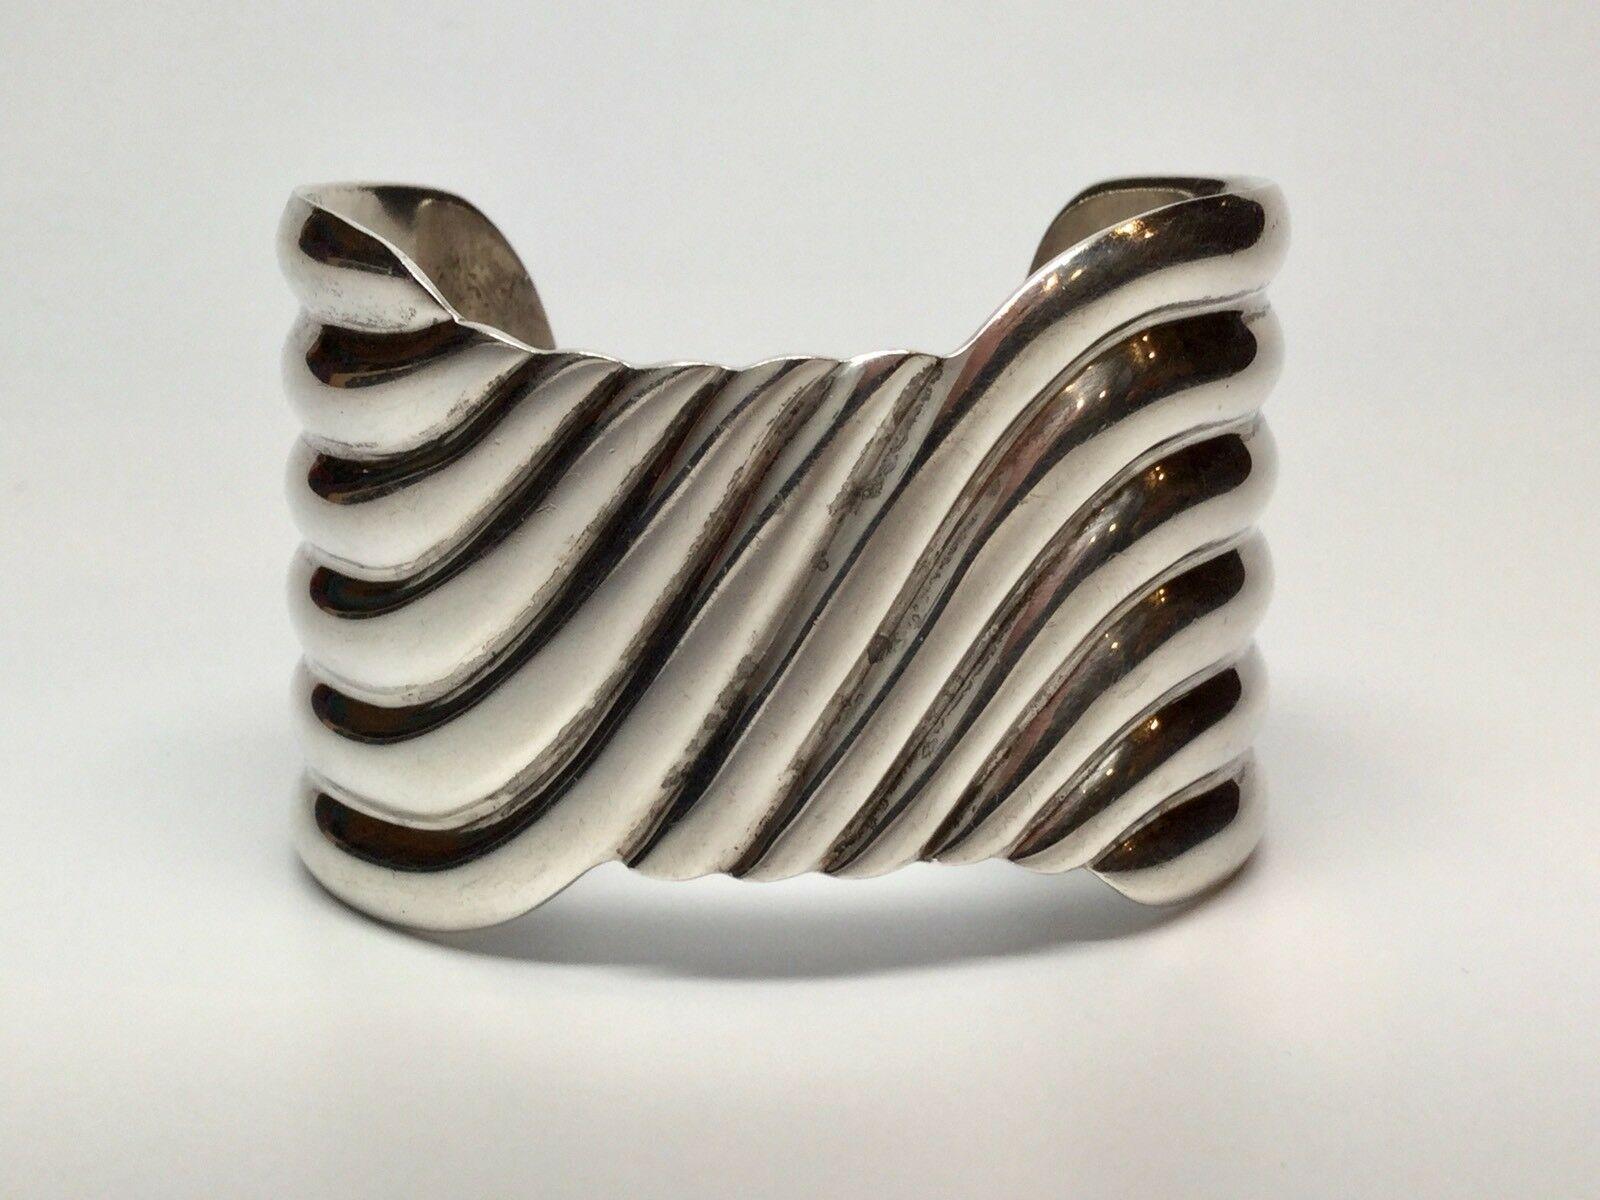 Vintage Sterling Silver Mexican Dulce Wave Design Cuff Bracelet

Marked: .925 Mexico

Signed: DULCE

Measurements: 

5 1/4” end to end

1 1/4” opening 

1 1/8” widest end

11/16” narrowest section

Weight: 52.1 dwt, 81 g

MD062618

Cuff is in very